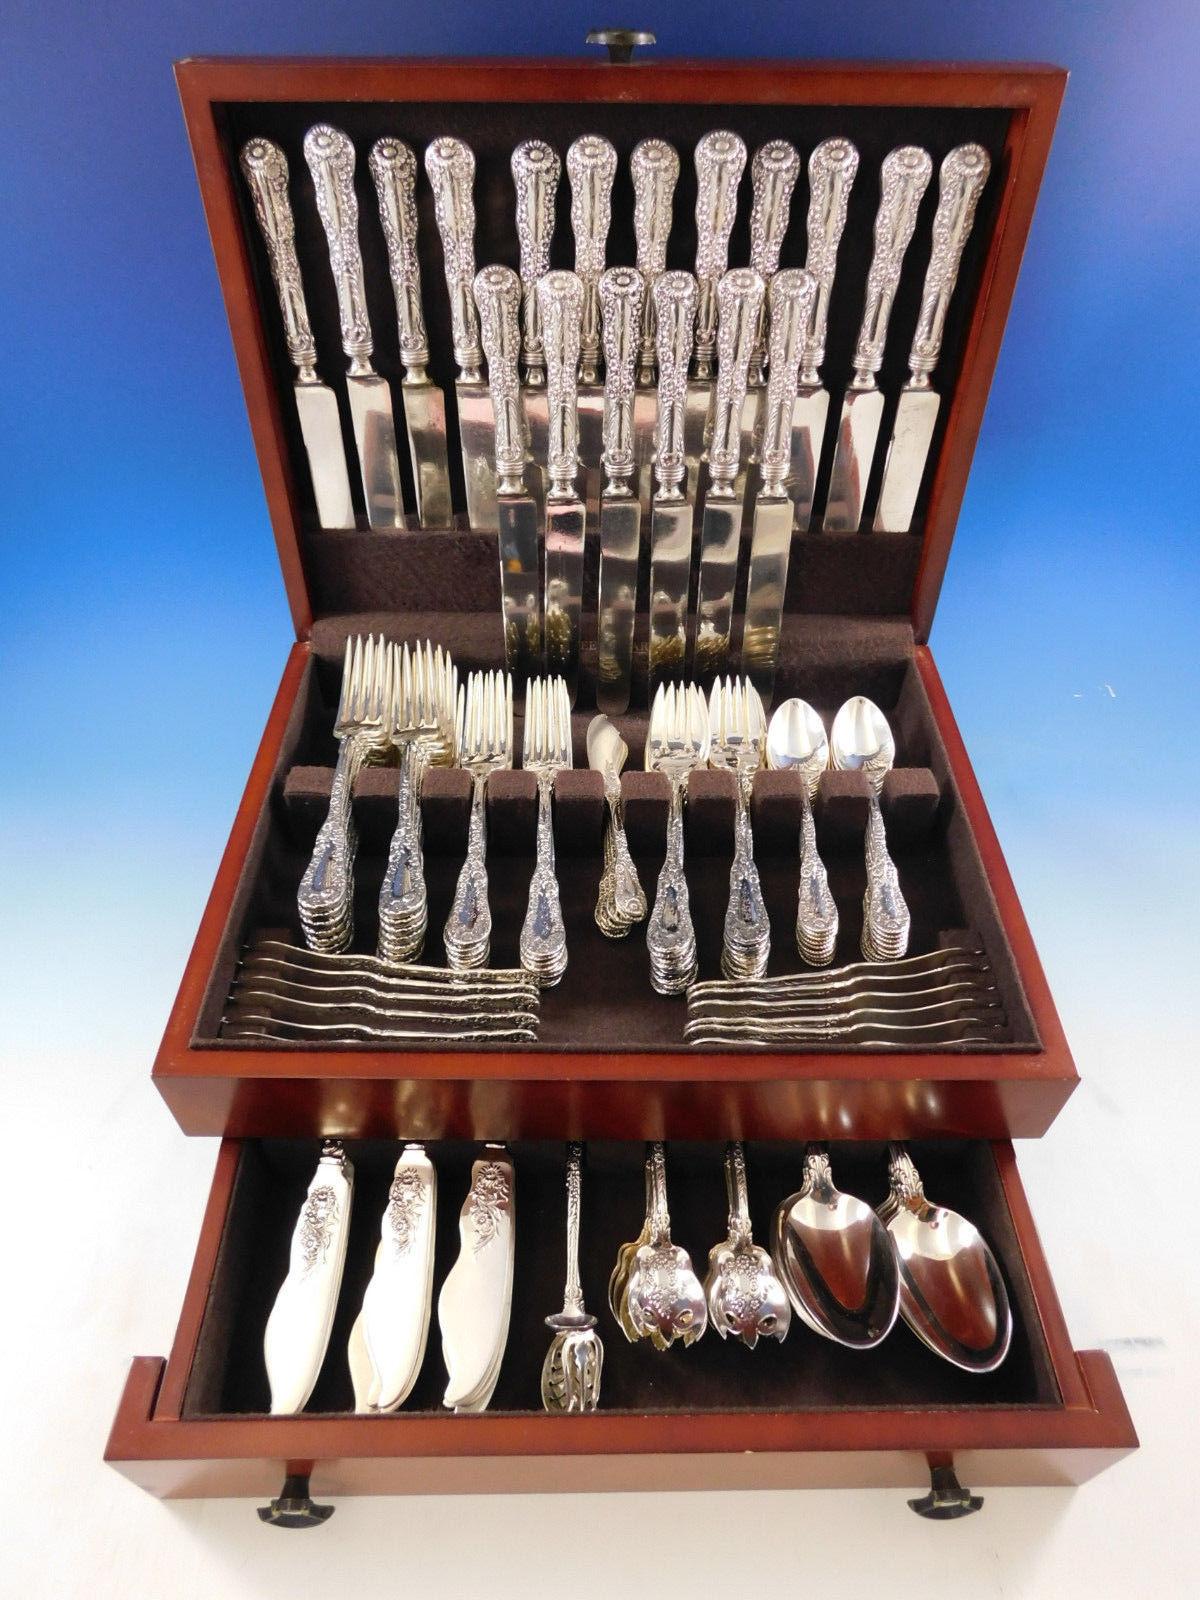 Monumental dinner size number 10 (ten) by Dominick & Haff sterling silver dinner size flatware set with massive weight dinner forks, 159 pieces. A beautiful chrysanthemum pattern. This set includes:

18 dinner size knives, 9 7/8